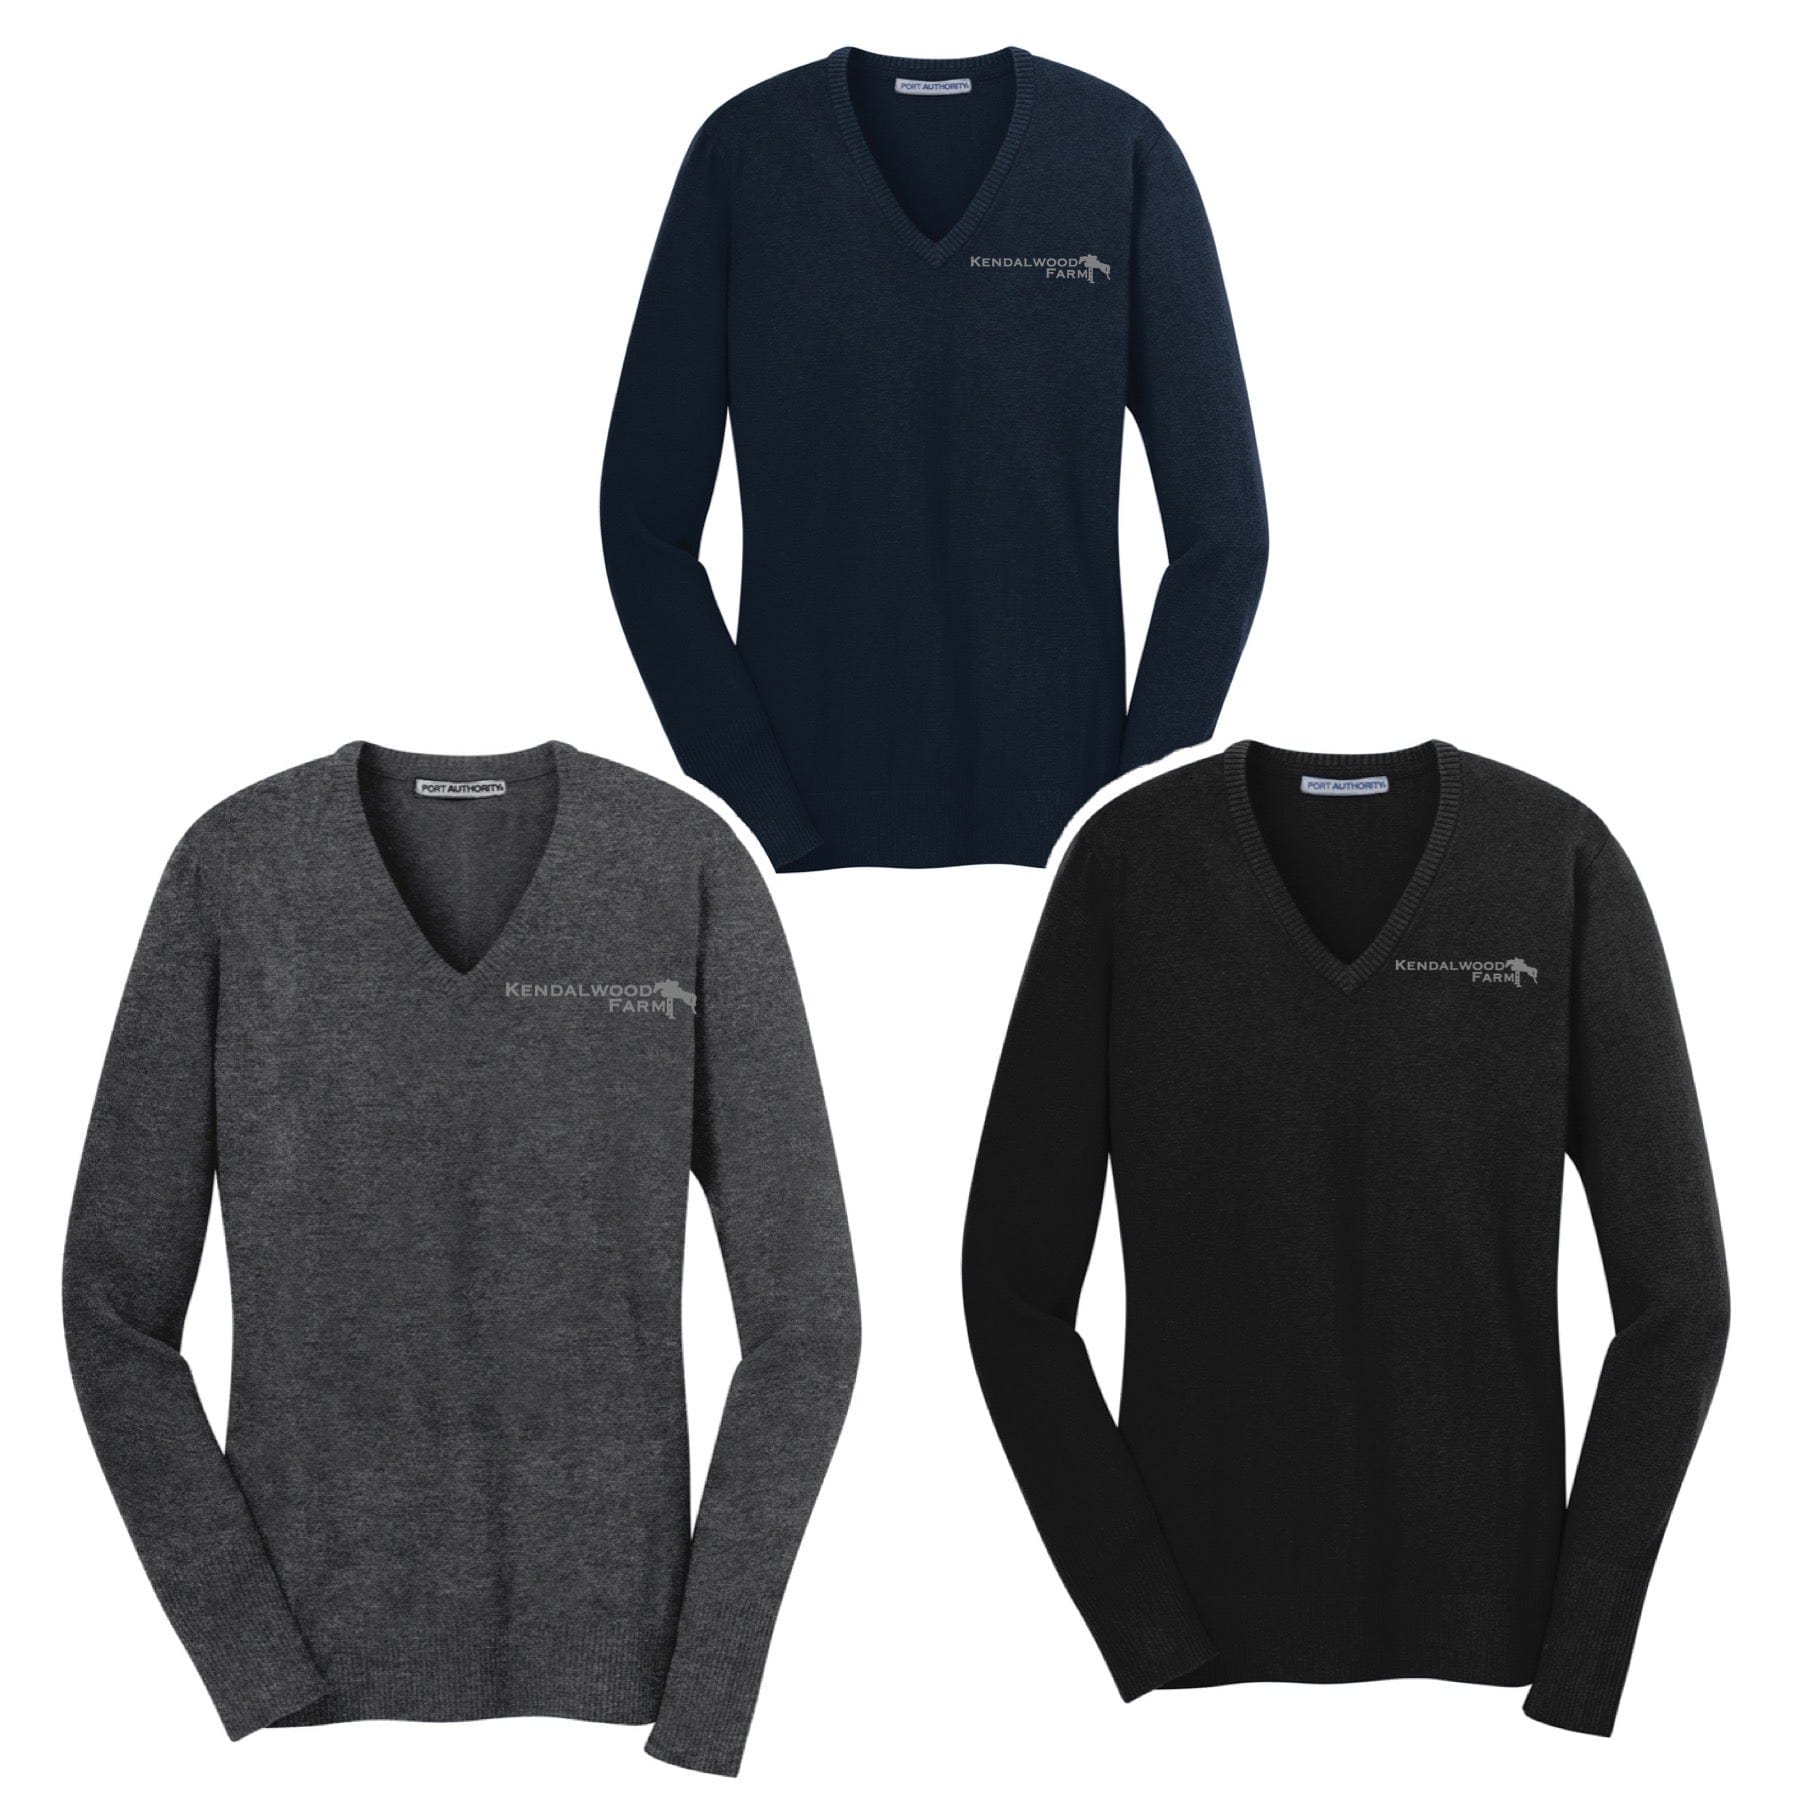 Equestrian Team Apparel Kendalwood Farm V neck Sweater equestrian team apparel online tack store mobile tack store custom farm apparel custom show stable clothing equestrian lifestyle horse show clothing riding clothes horses equestrian tack store